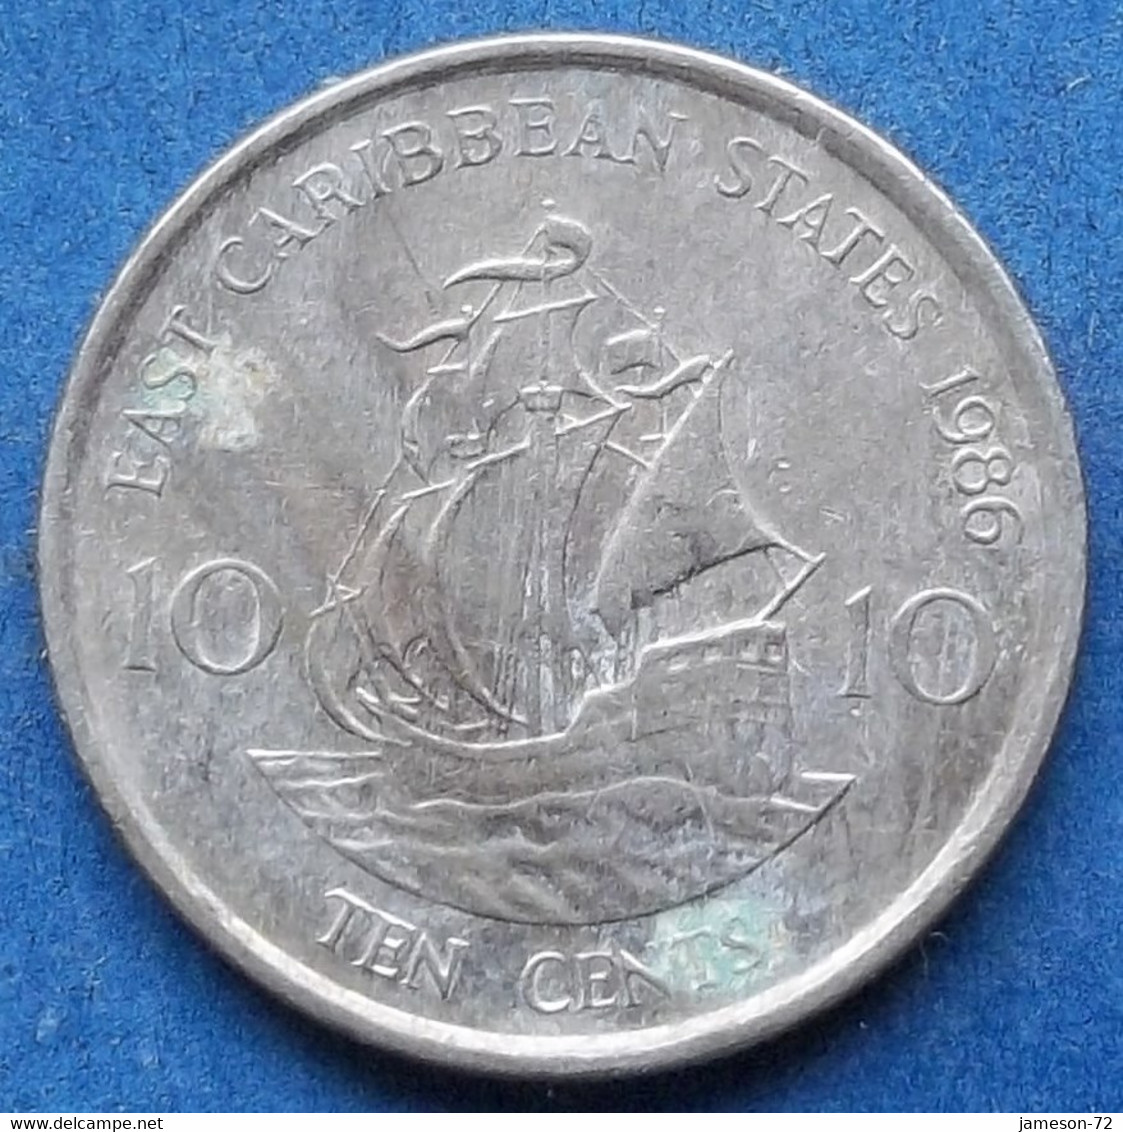 EAST CARIBBEAN STATES - 10 Cents 1986 KM# 13 - Edelweiss Coins - Oost-Caribische Staten